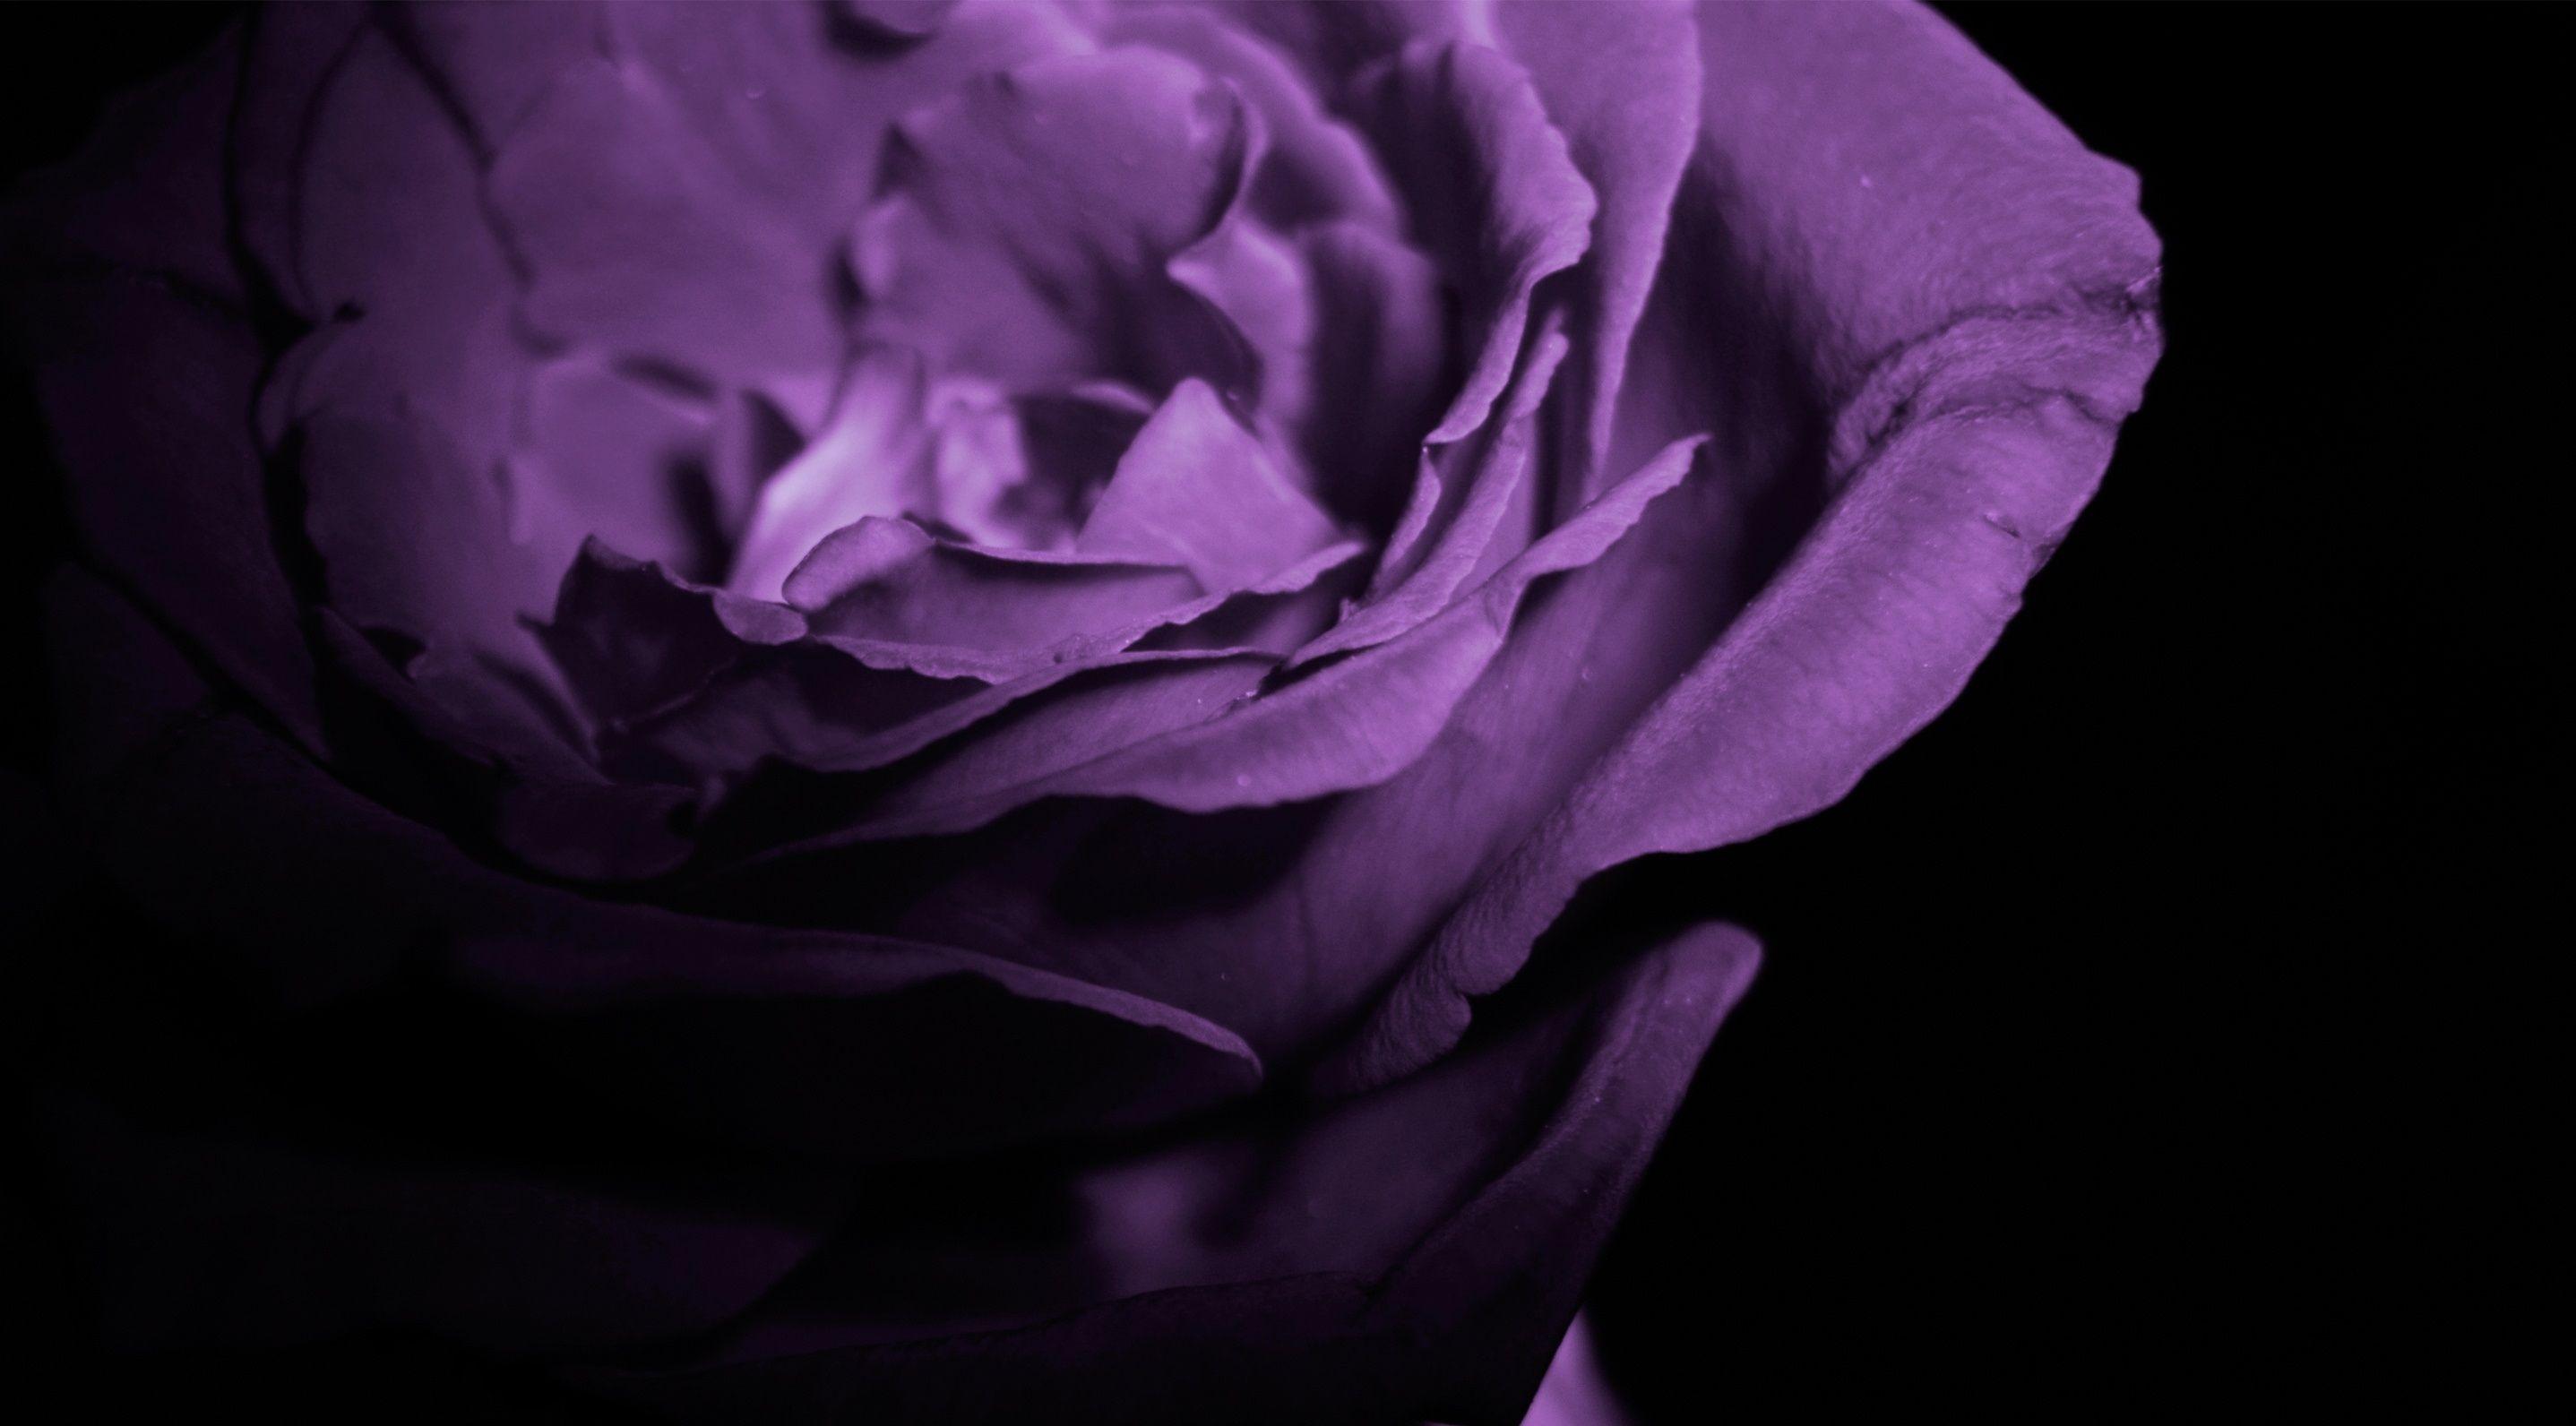 Purple and Black Rose Wallpapers - Top Free Purple and Black Rose